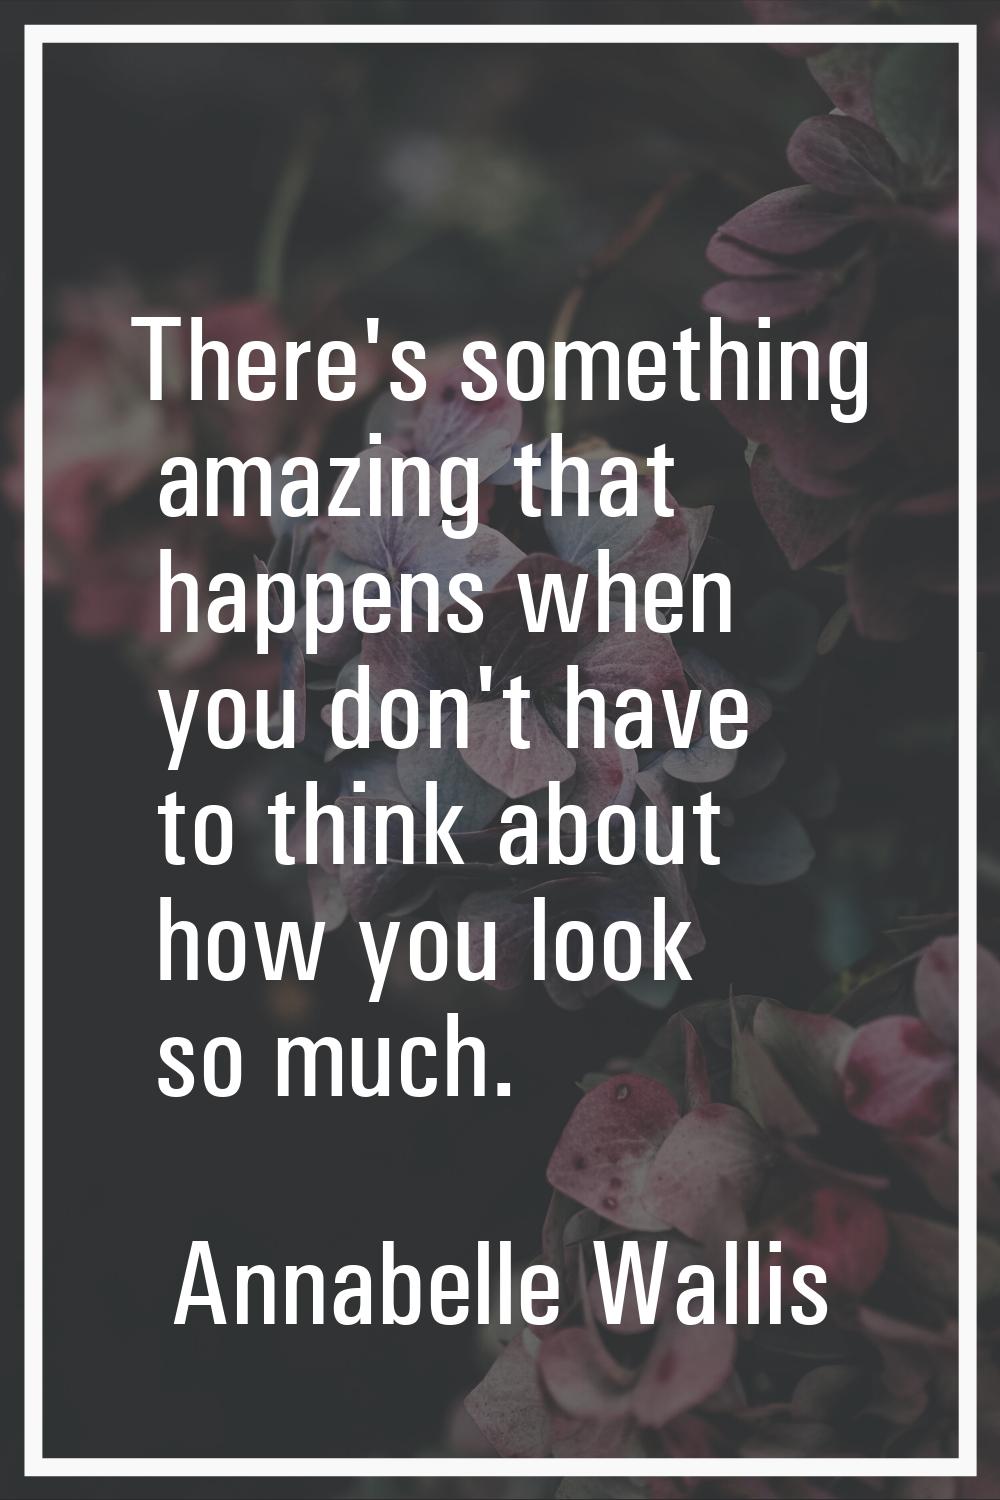 There's something amazing that happens when you don't have to think about how you look so much.